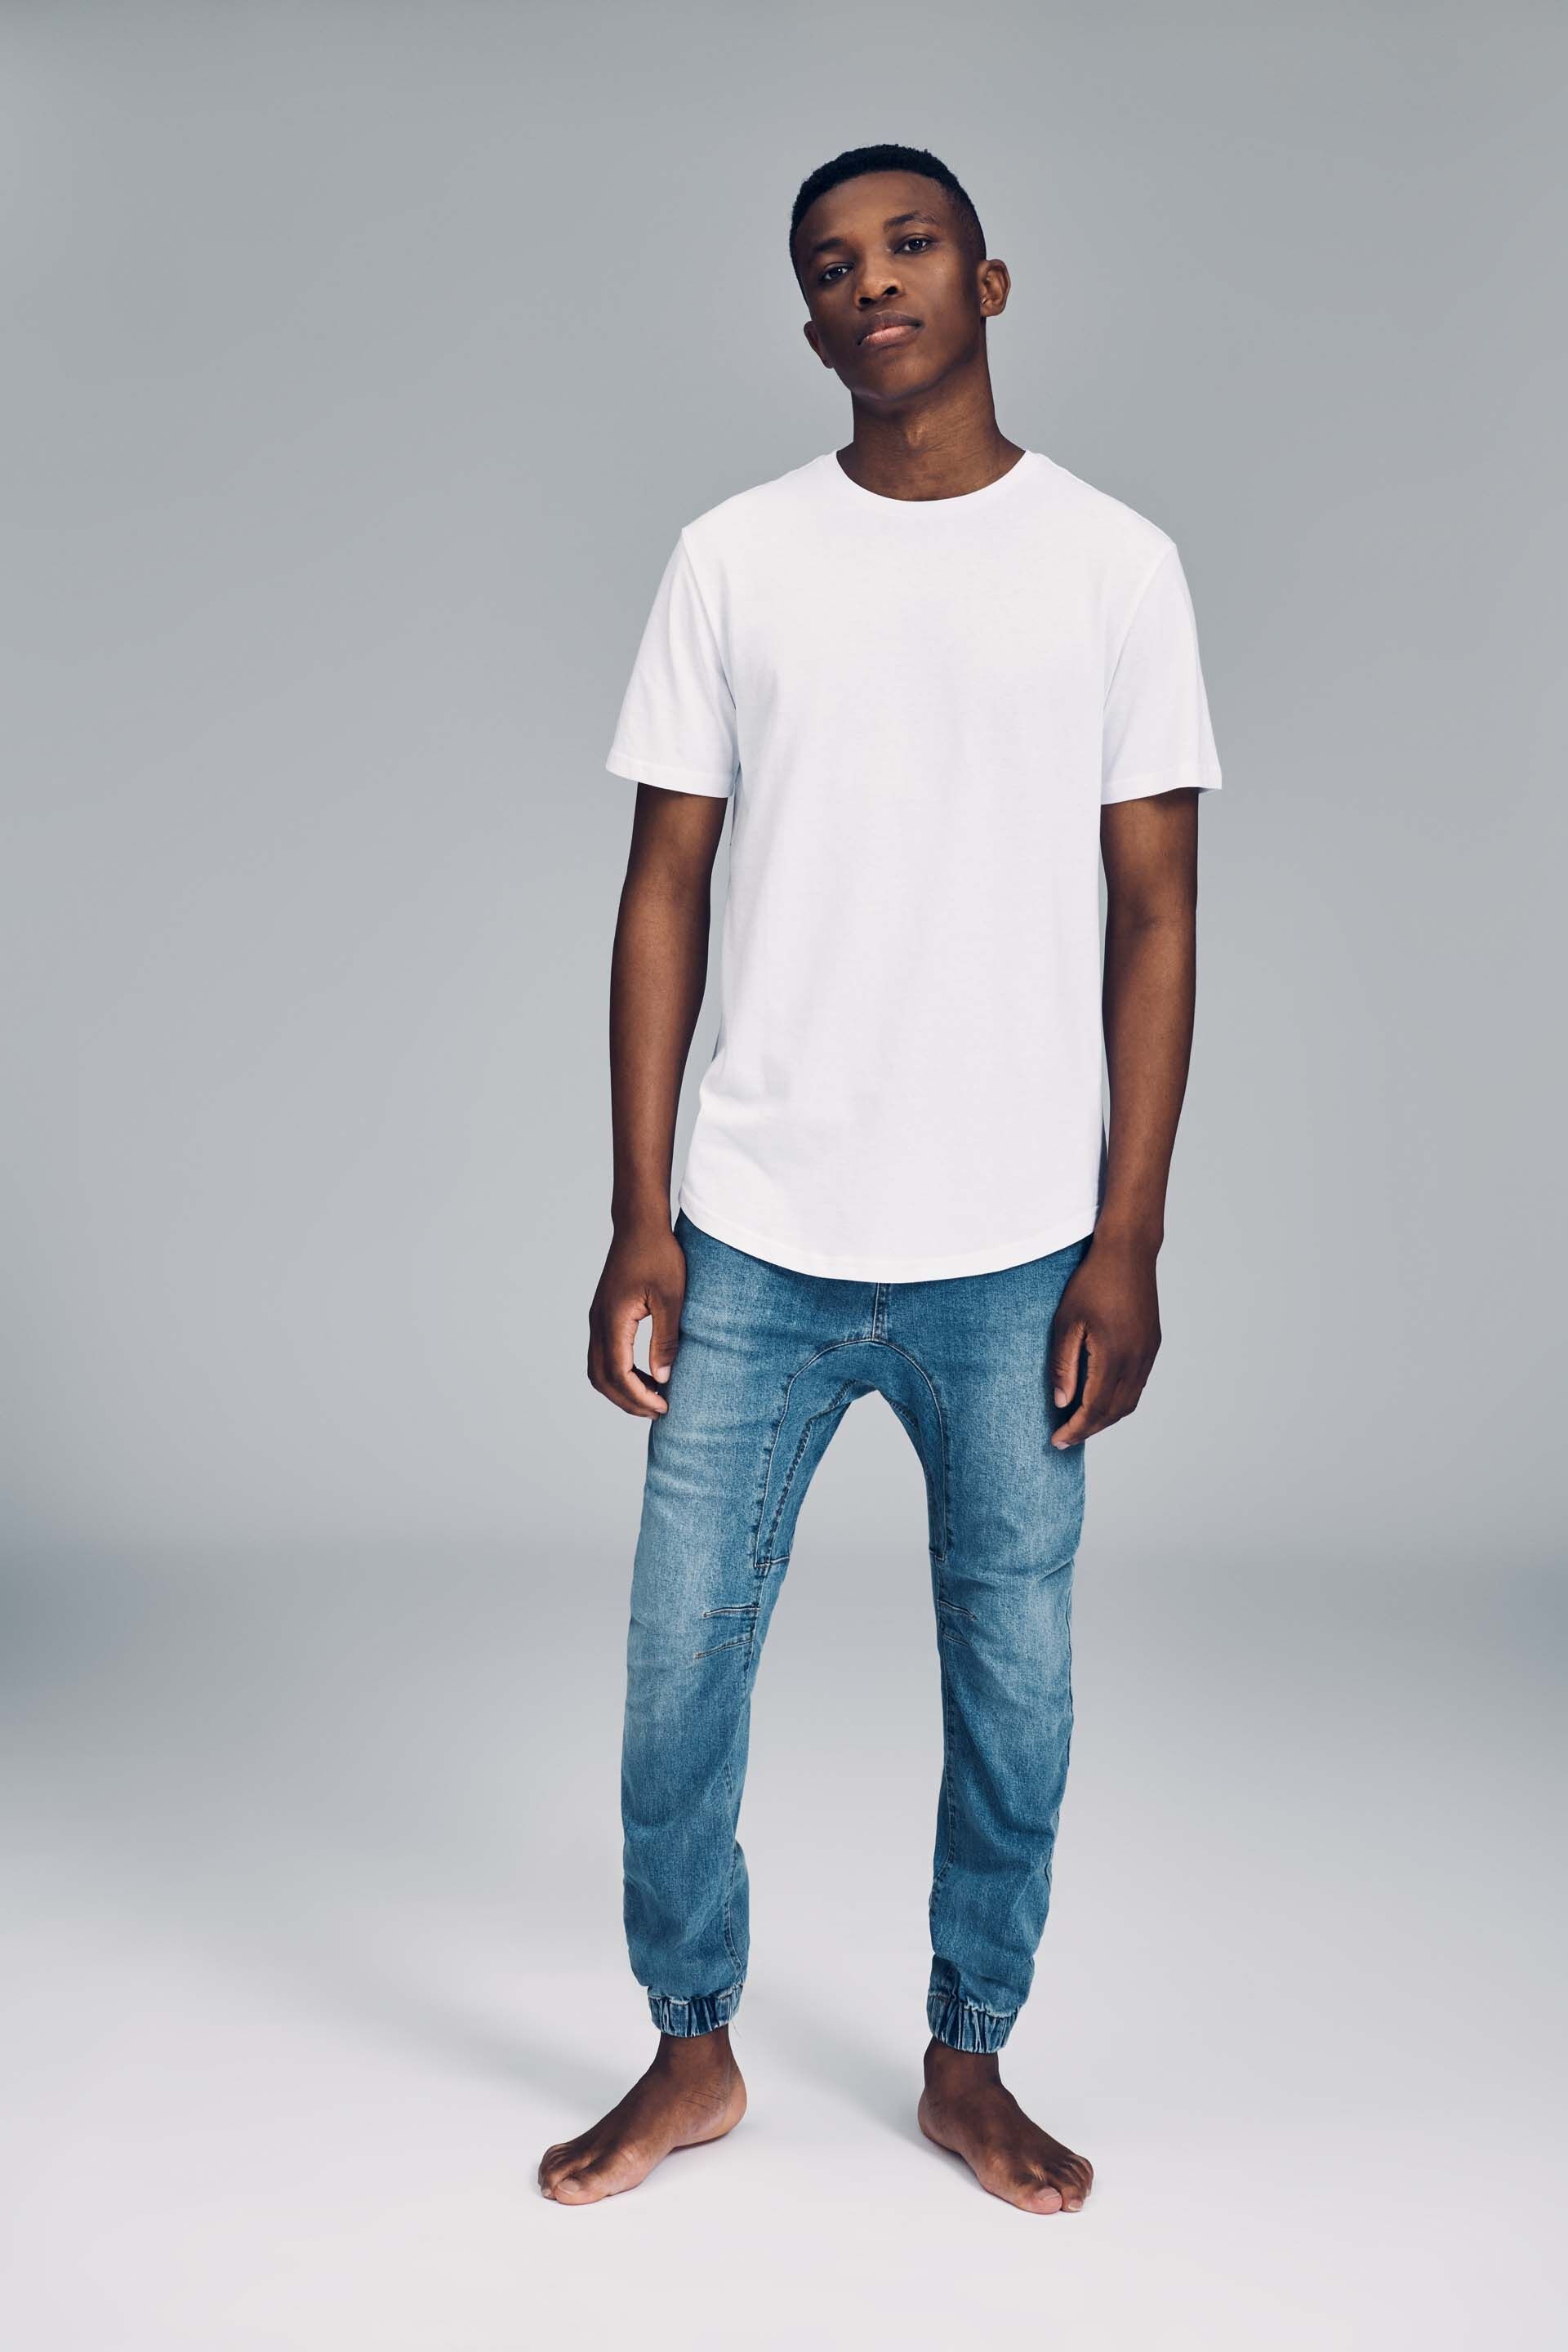 levis 501 the rose stretch